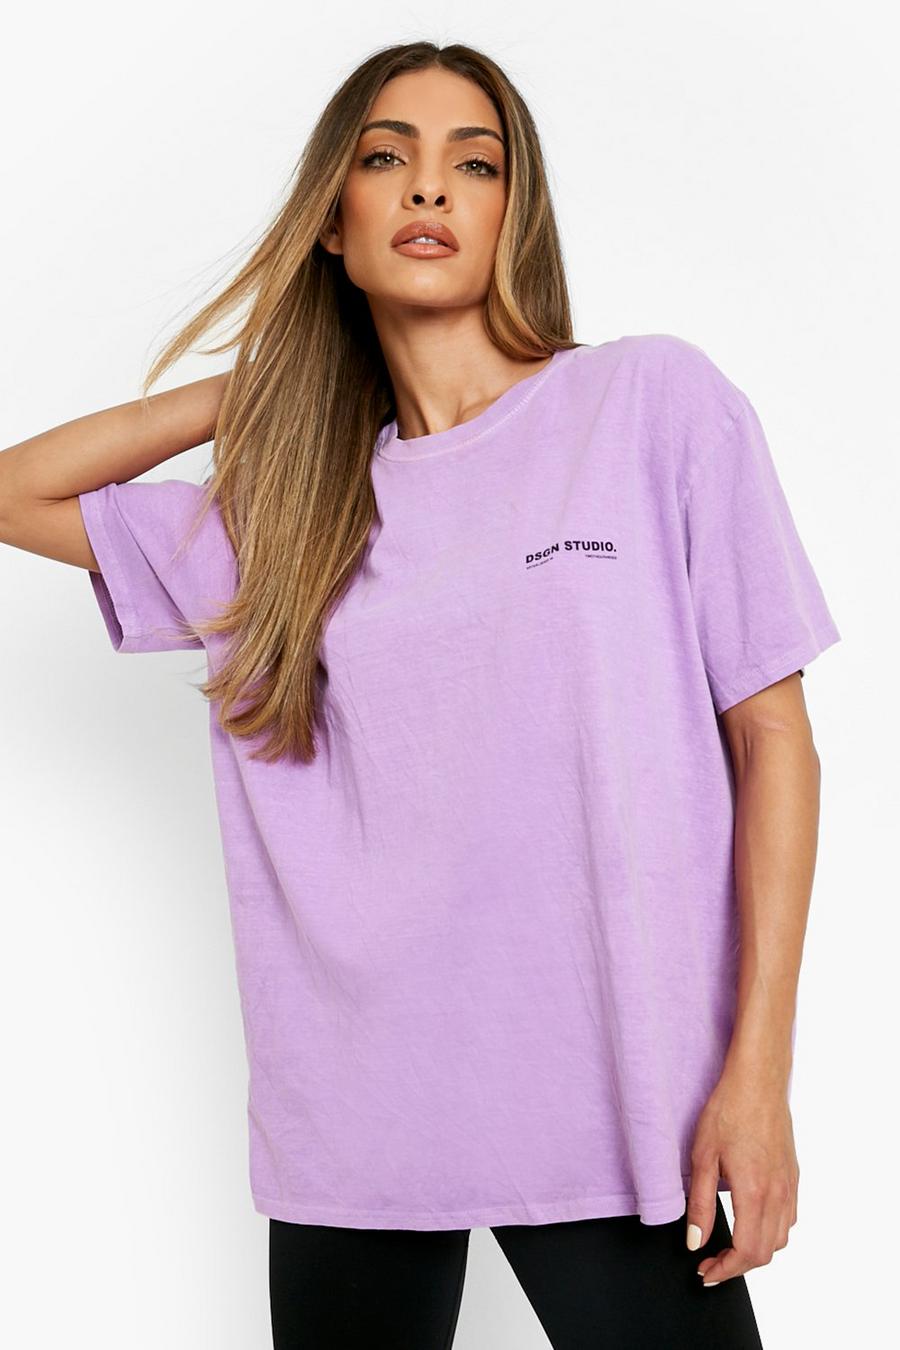 Purple Dsgn Studio Overdyed Graphic T-Shirt image number 1